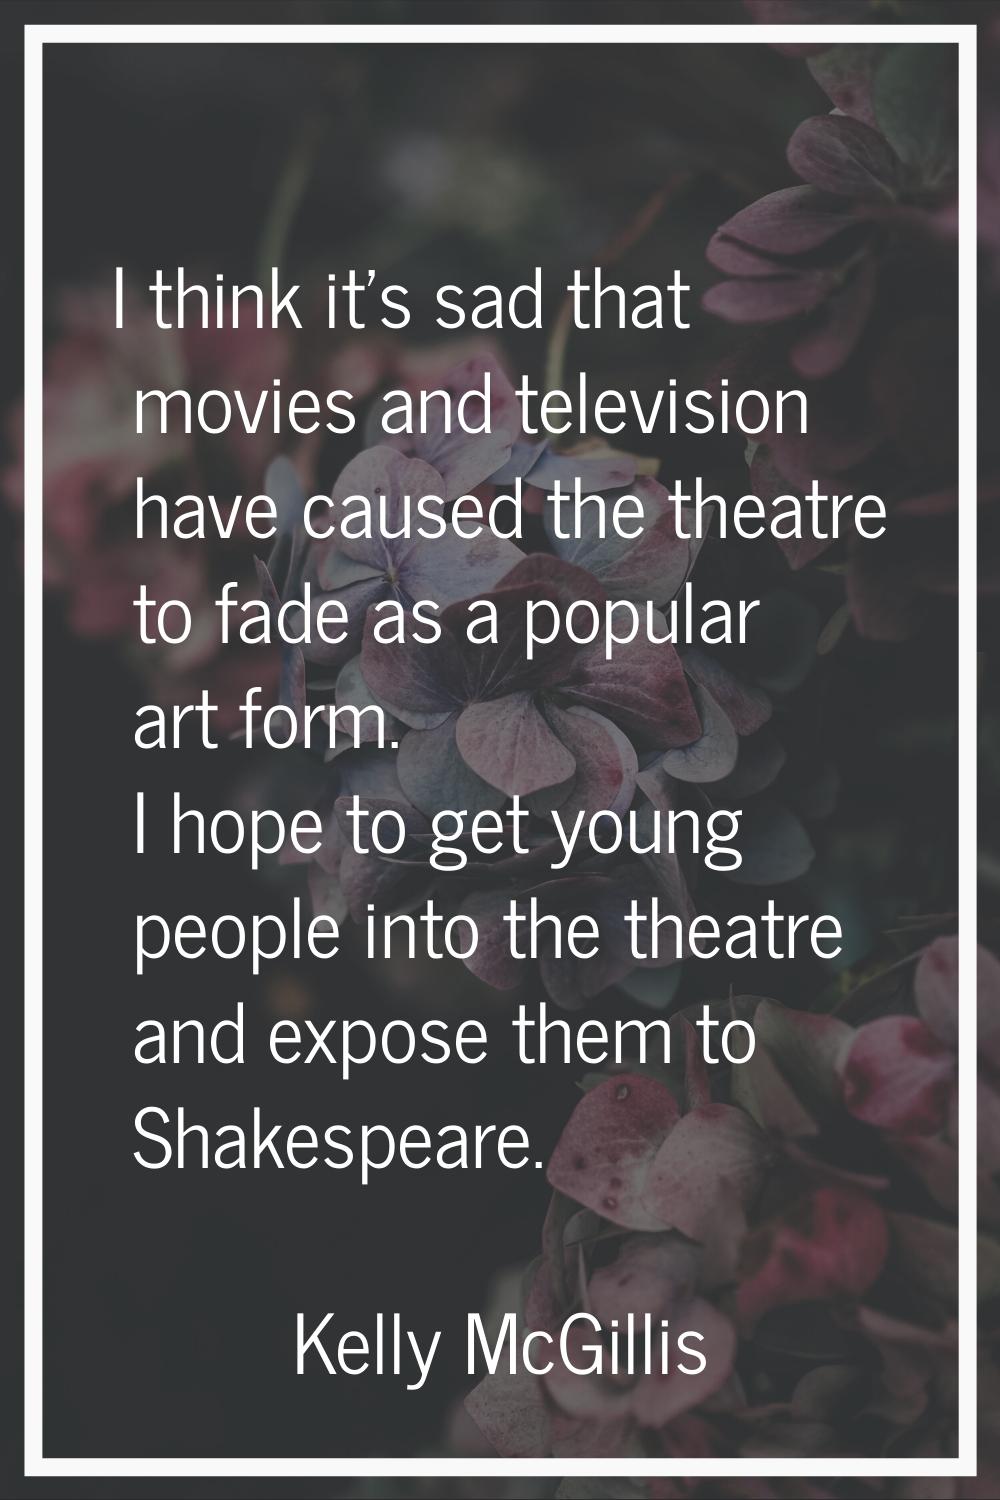 I think it's sad that movies and television have caused the theatre to fade as a popular art form. 